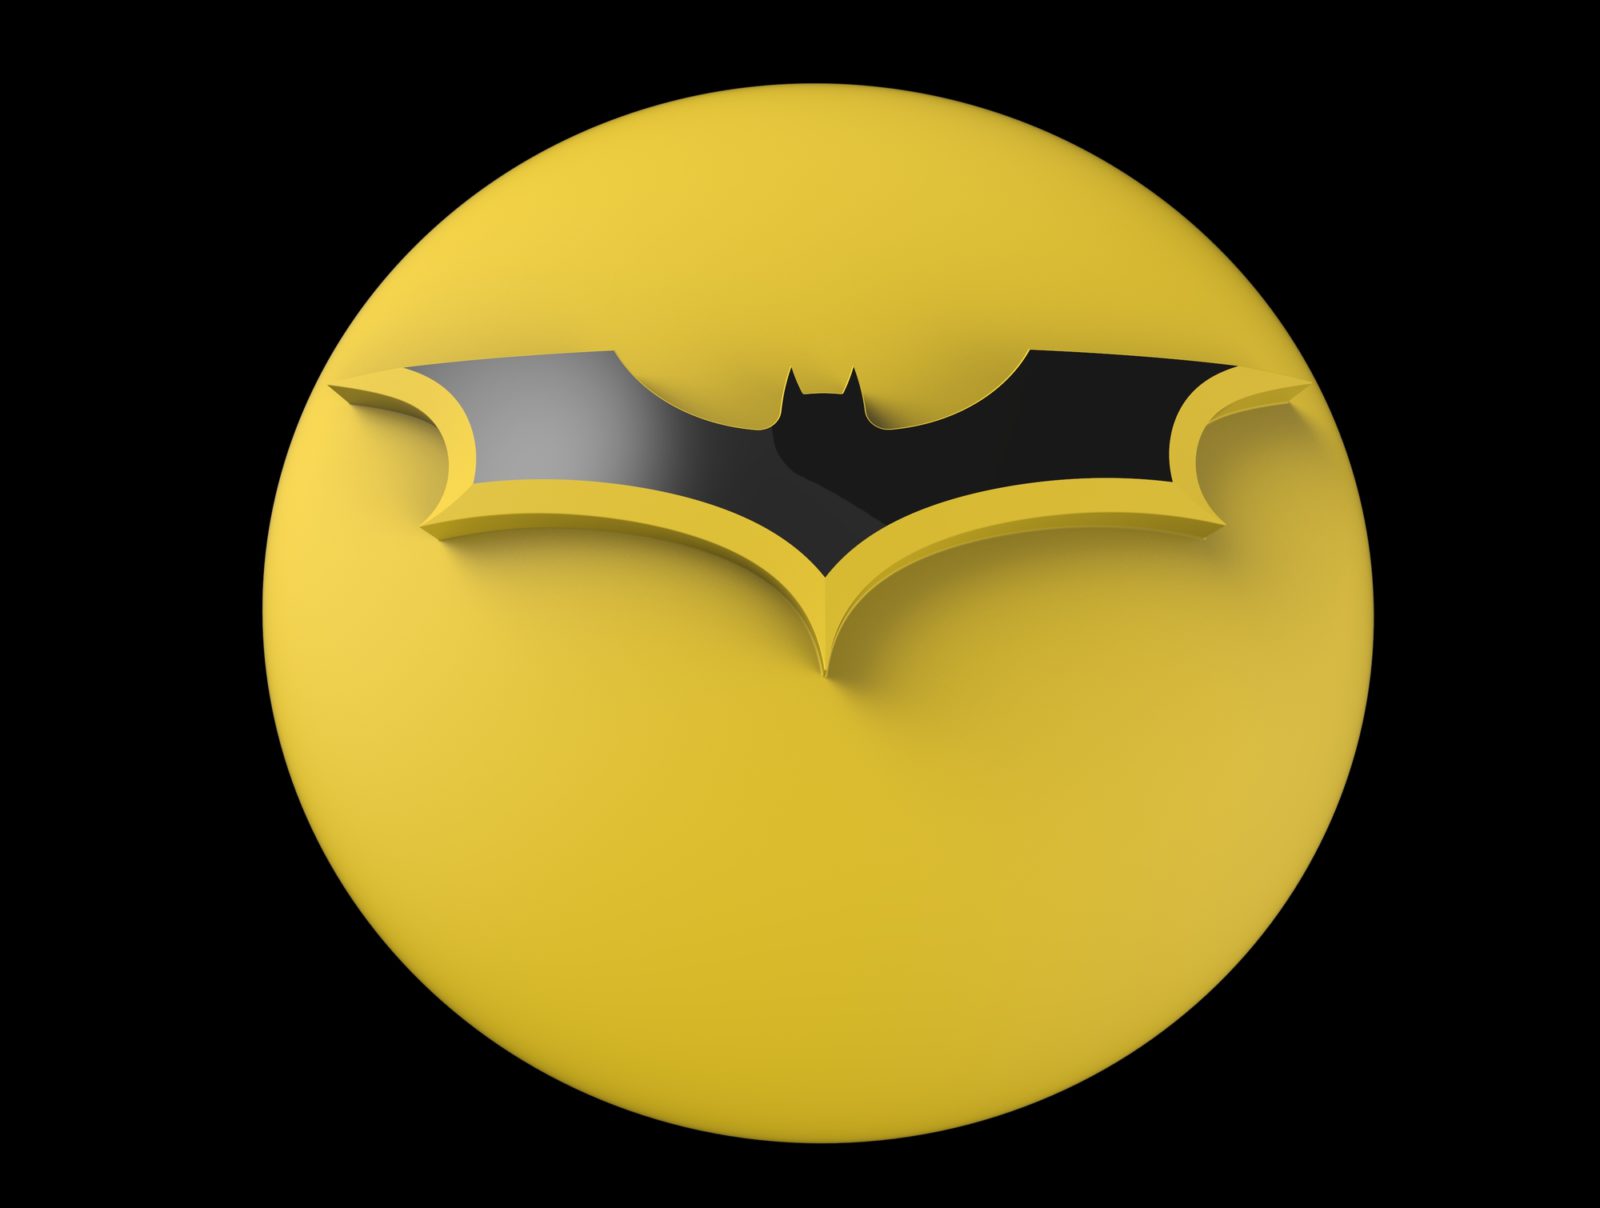 Creative Event Themes: The Batcave